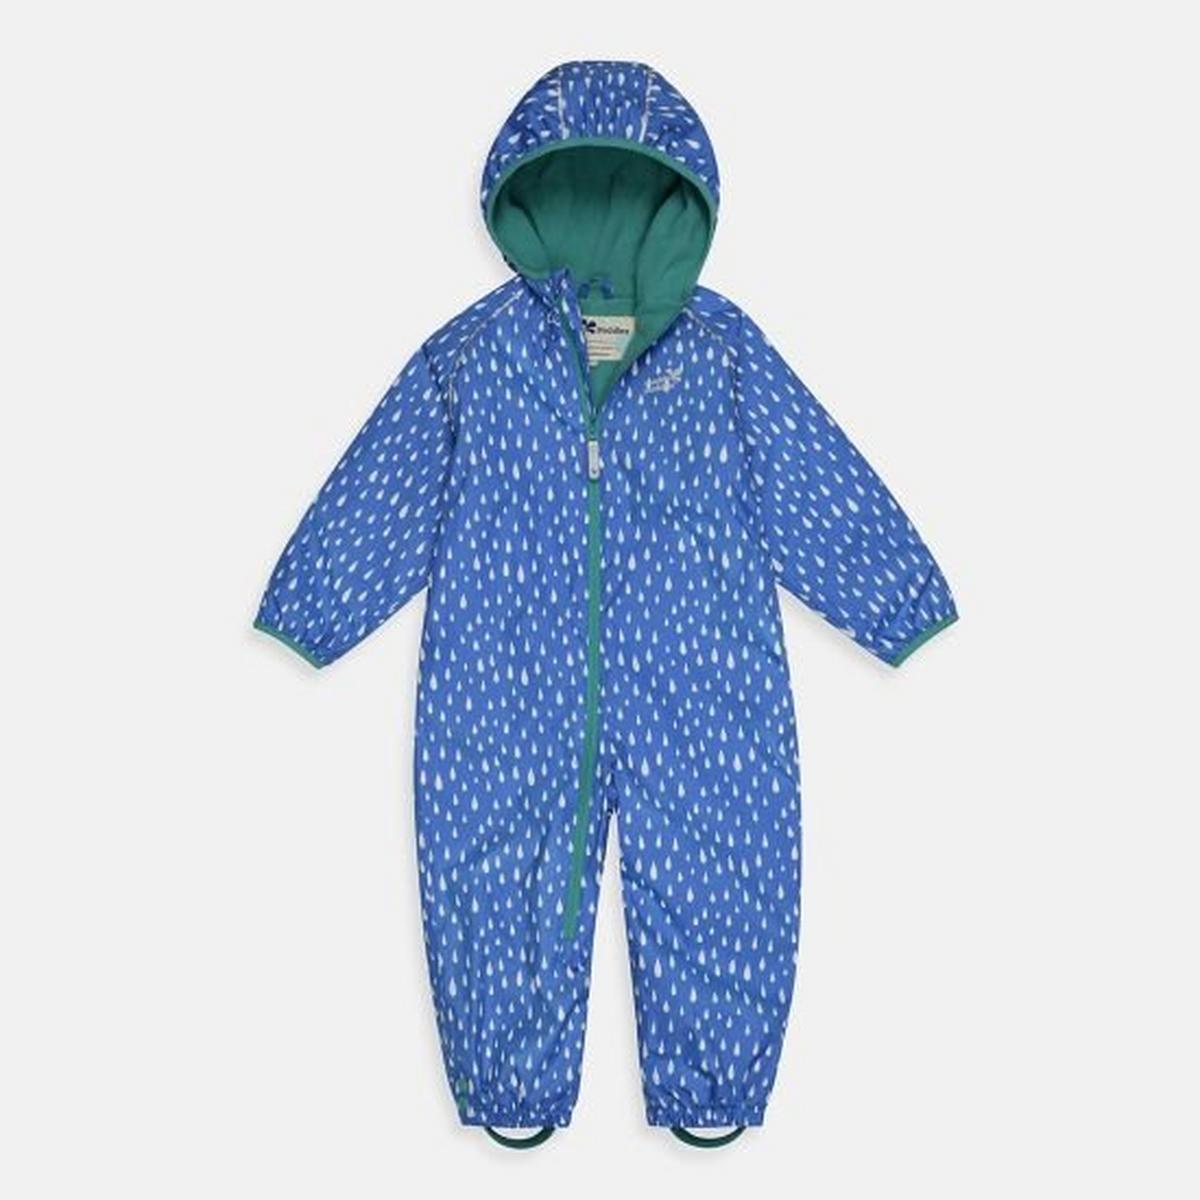 Muddy Puddles Kids' All-In-One Fleece Lined Puddlesuit - Blue